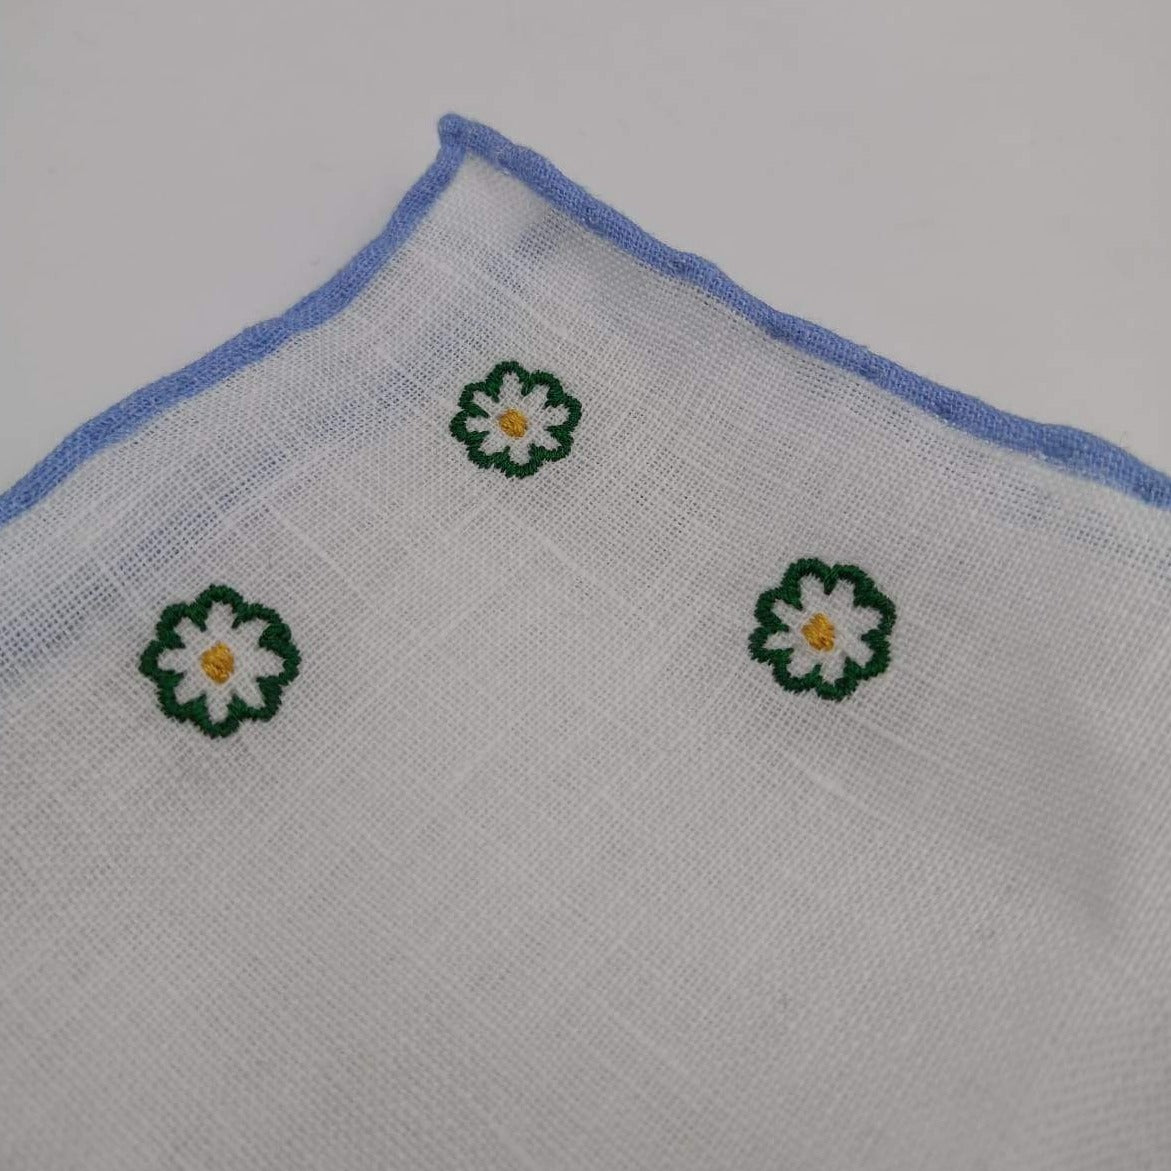 Cruciani & Bella 100% Linen Hand-rolled  -  Pocket Square White and Light Blue  Flower Motif Green Handmade in Italy 31 cm X 31cm #3340